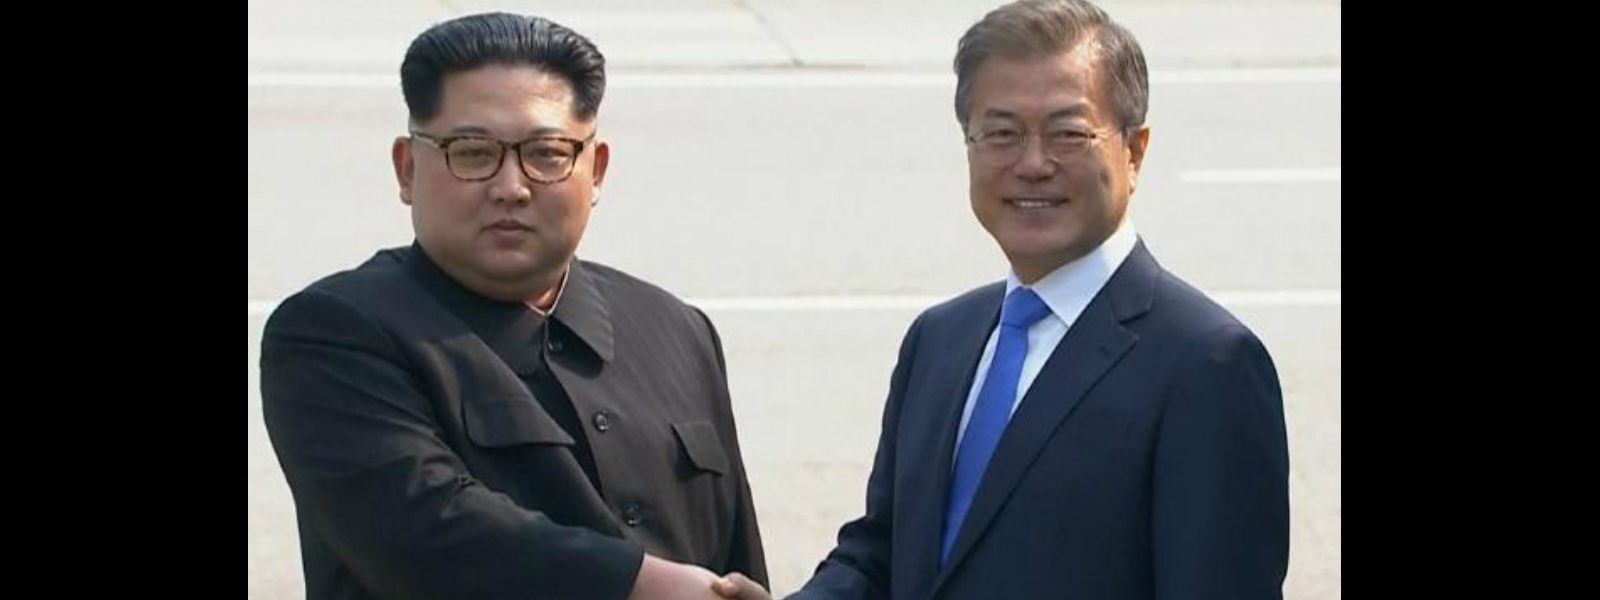 Two Korean leaders step into history